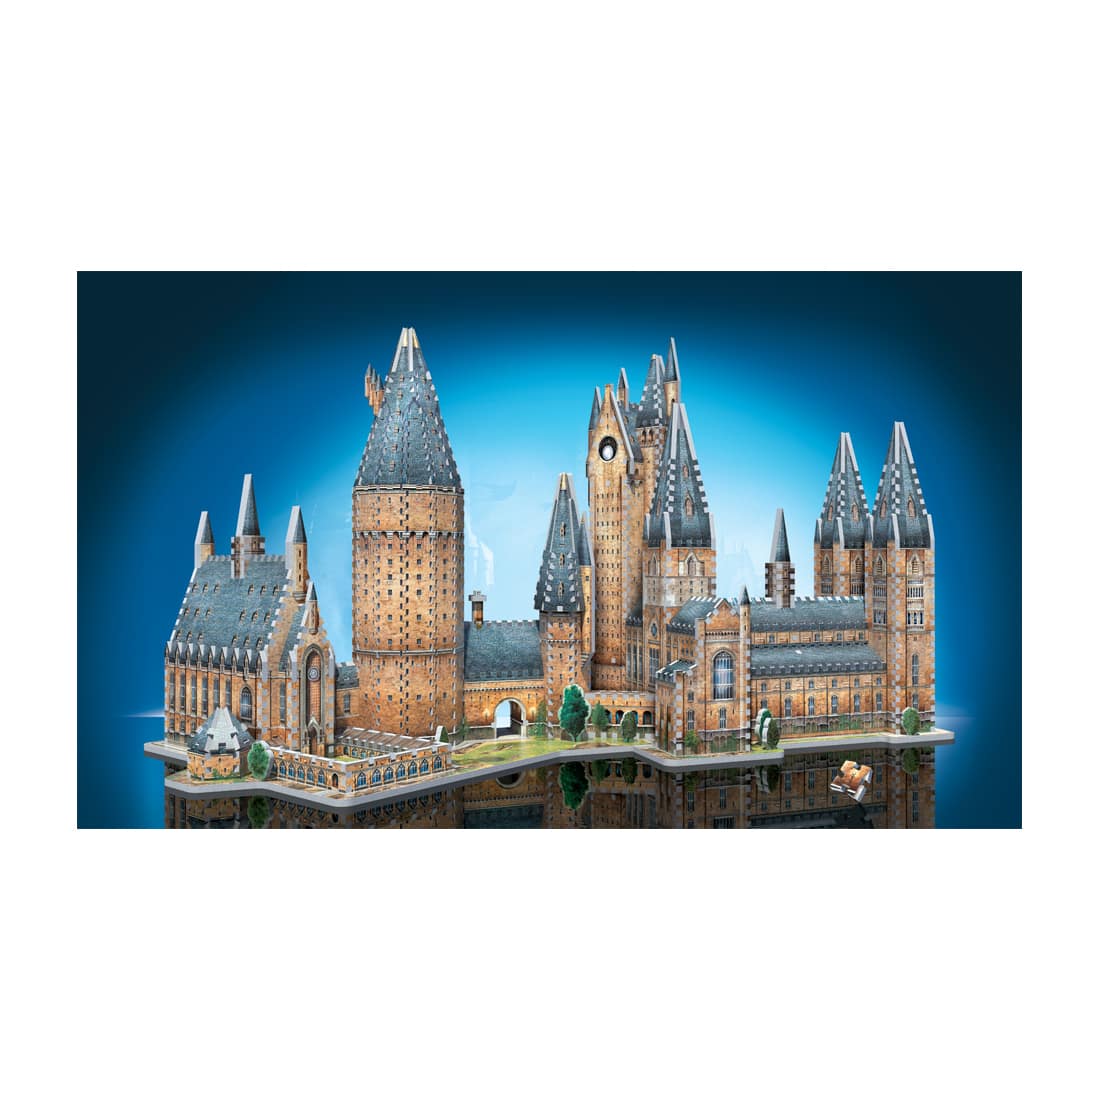 Wrebbit3d Hogwarts Castle 3D Puzzle for Teens and Adults | Great Hall  Astronomy Tower Bundle | 1725 Jigsaw Puzzle Pieces | Not Just an Ordinary  Model